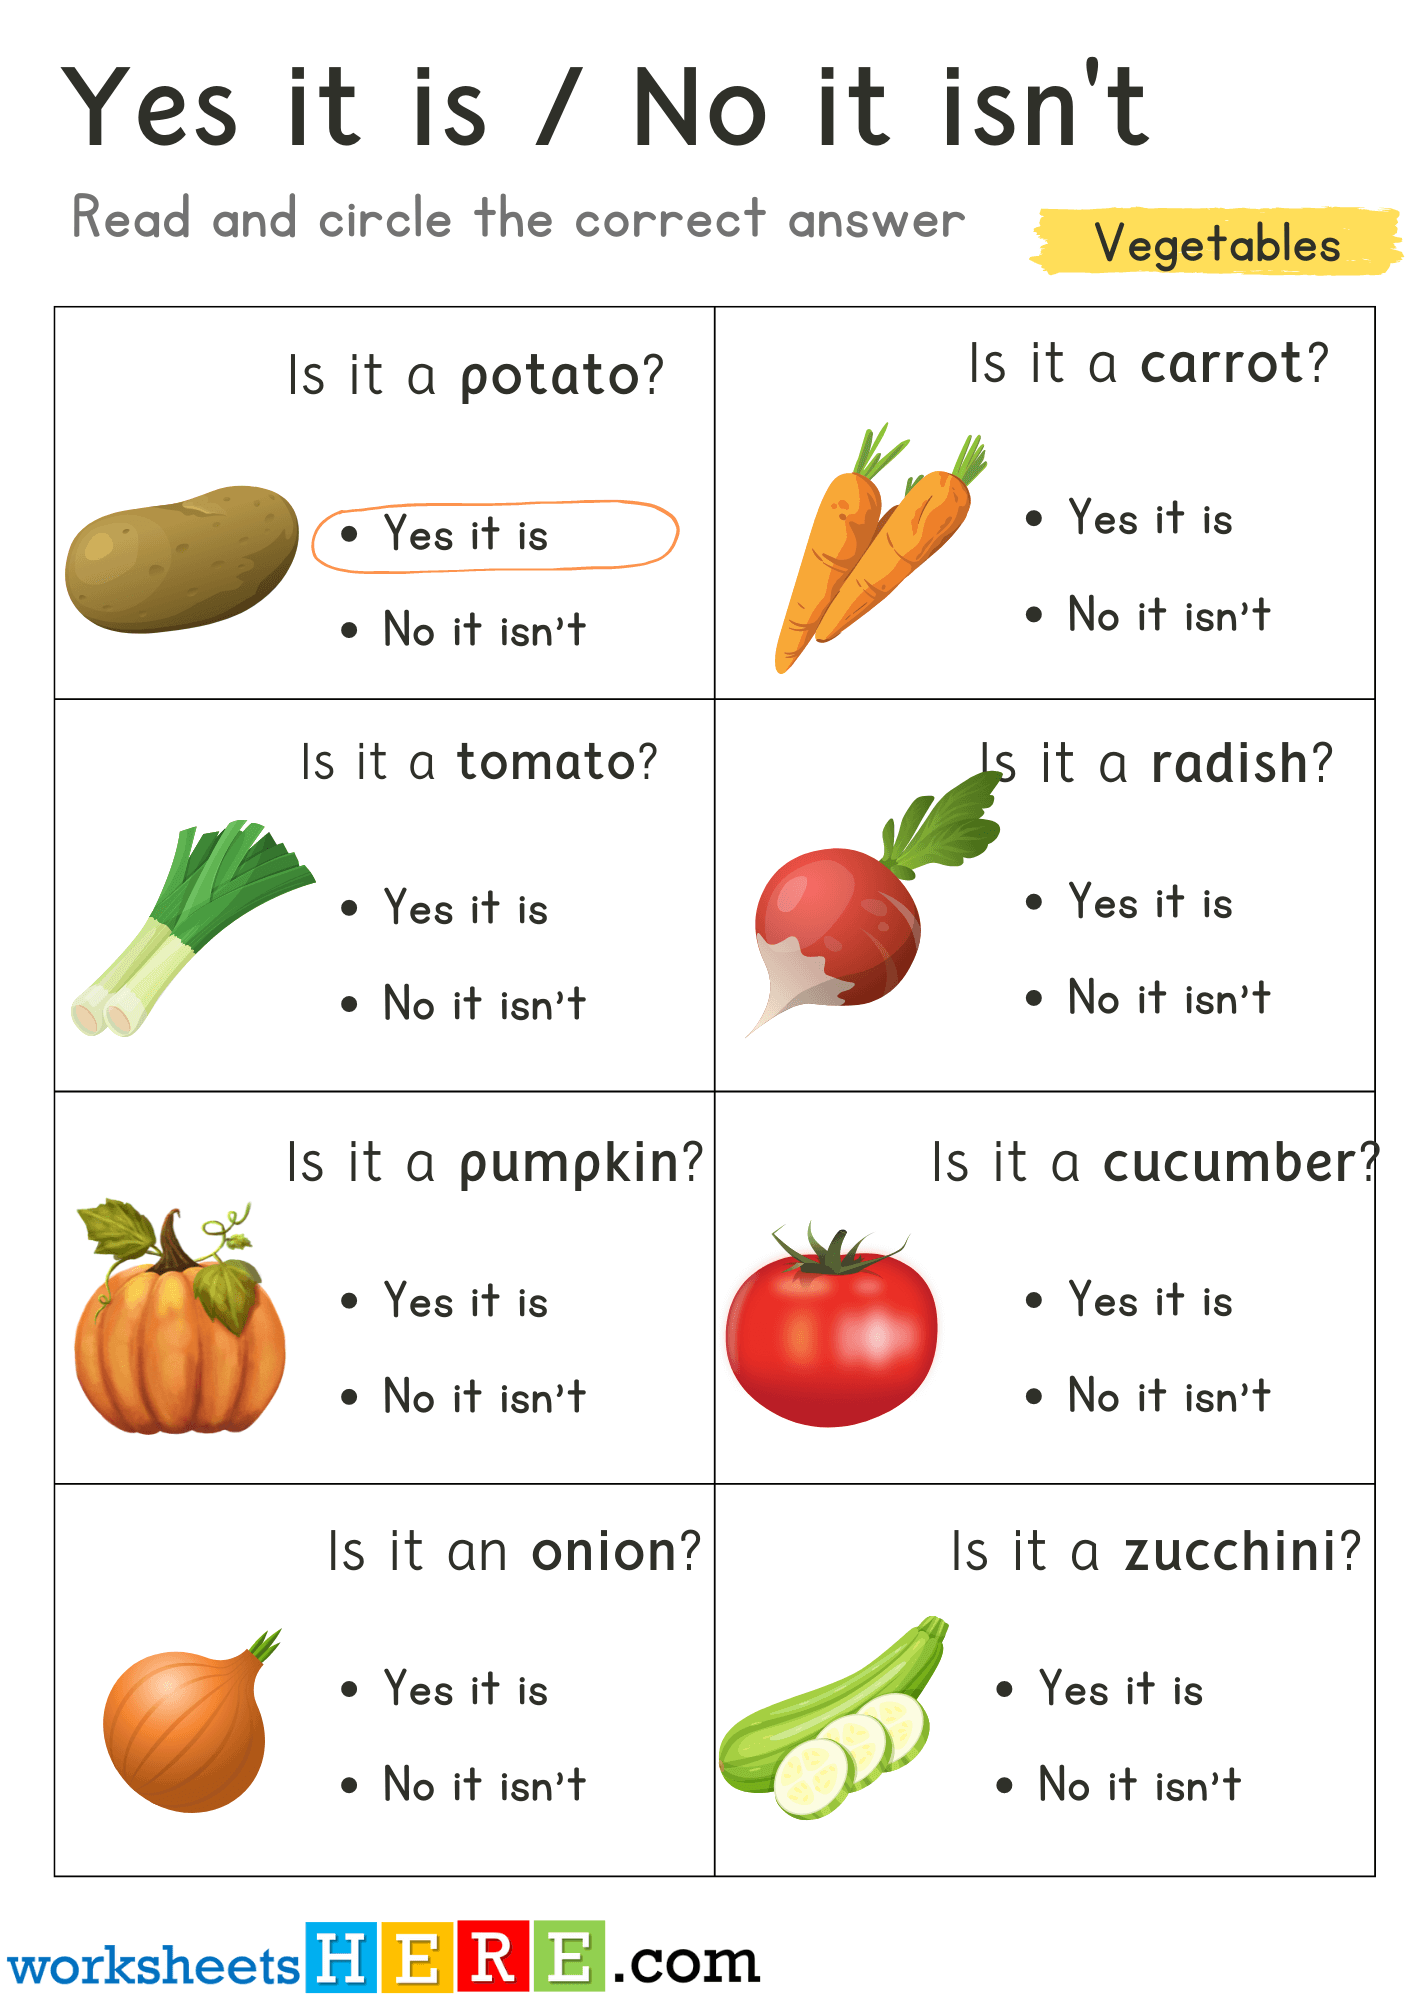 Yes No, Read and Circle Correct Answer with Vegetables Pictures PDF Worksheet